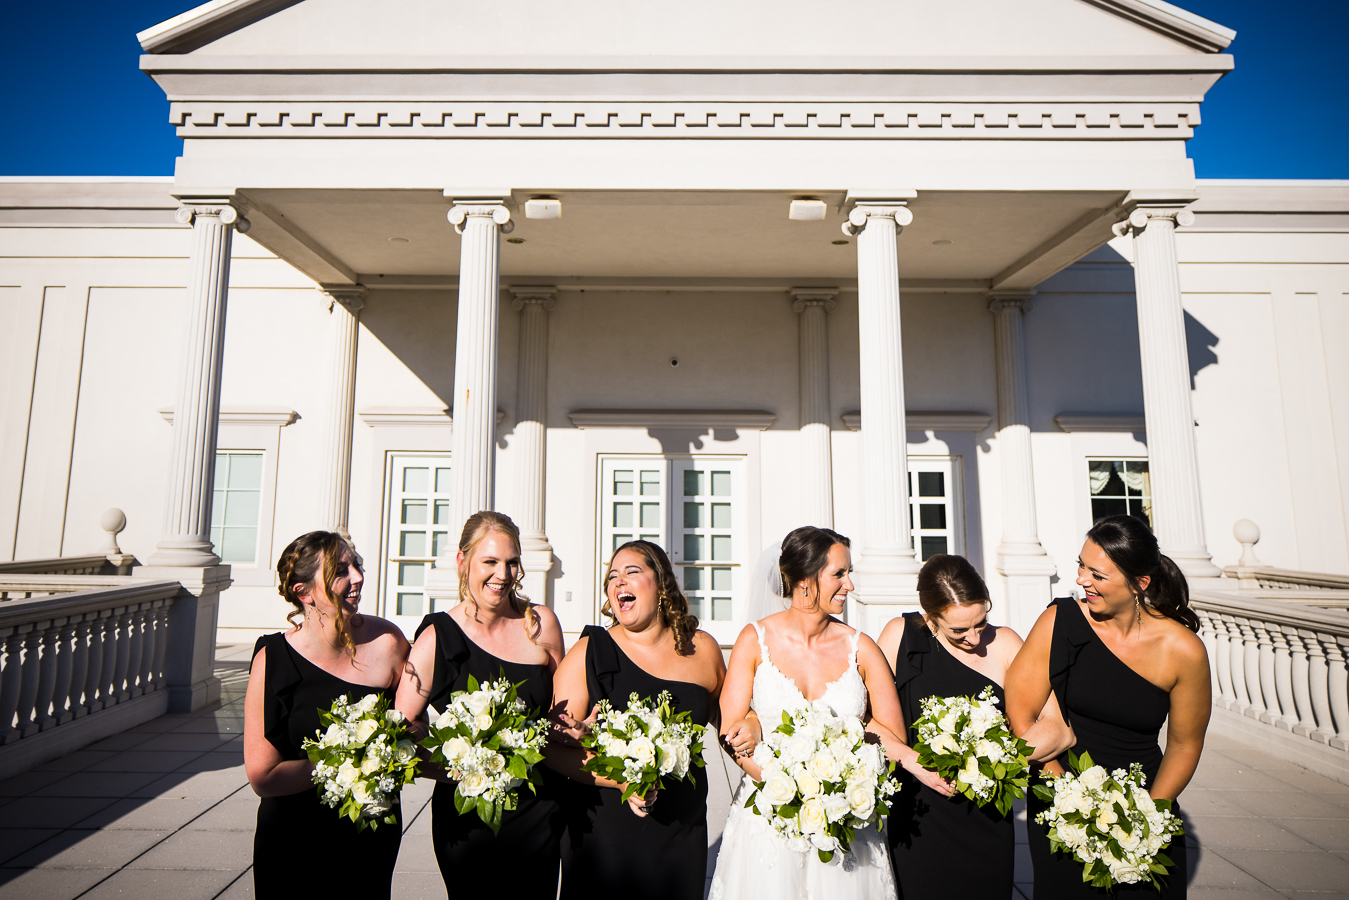 nj wedding photographer, lisa rhinehart, captures this fun, candid moment between the bride and her bridesmaids as they walk in front of the palace at somerset arm in arm laughing and smiling at each other in their black and white dresses